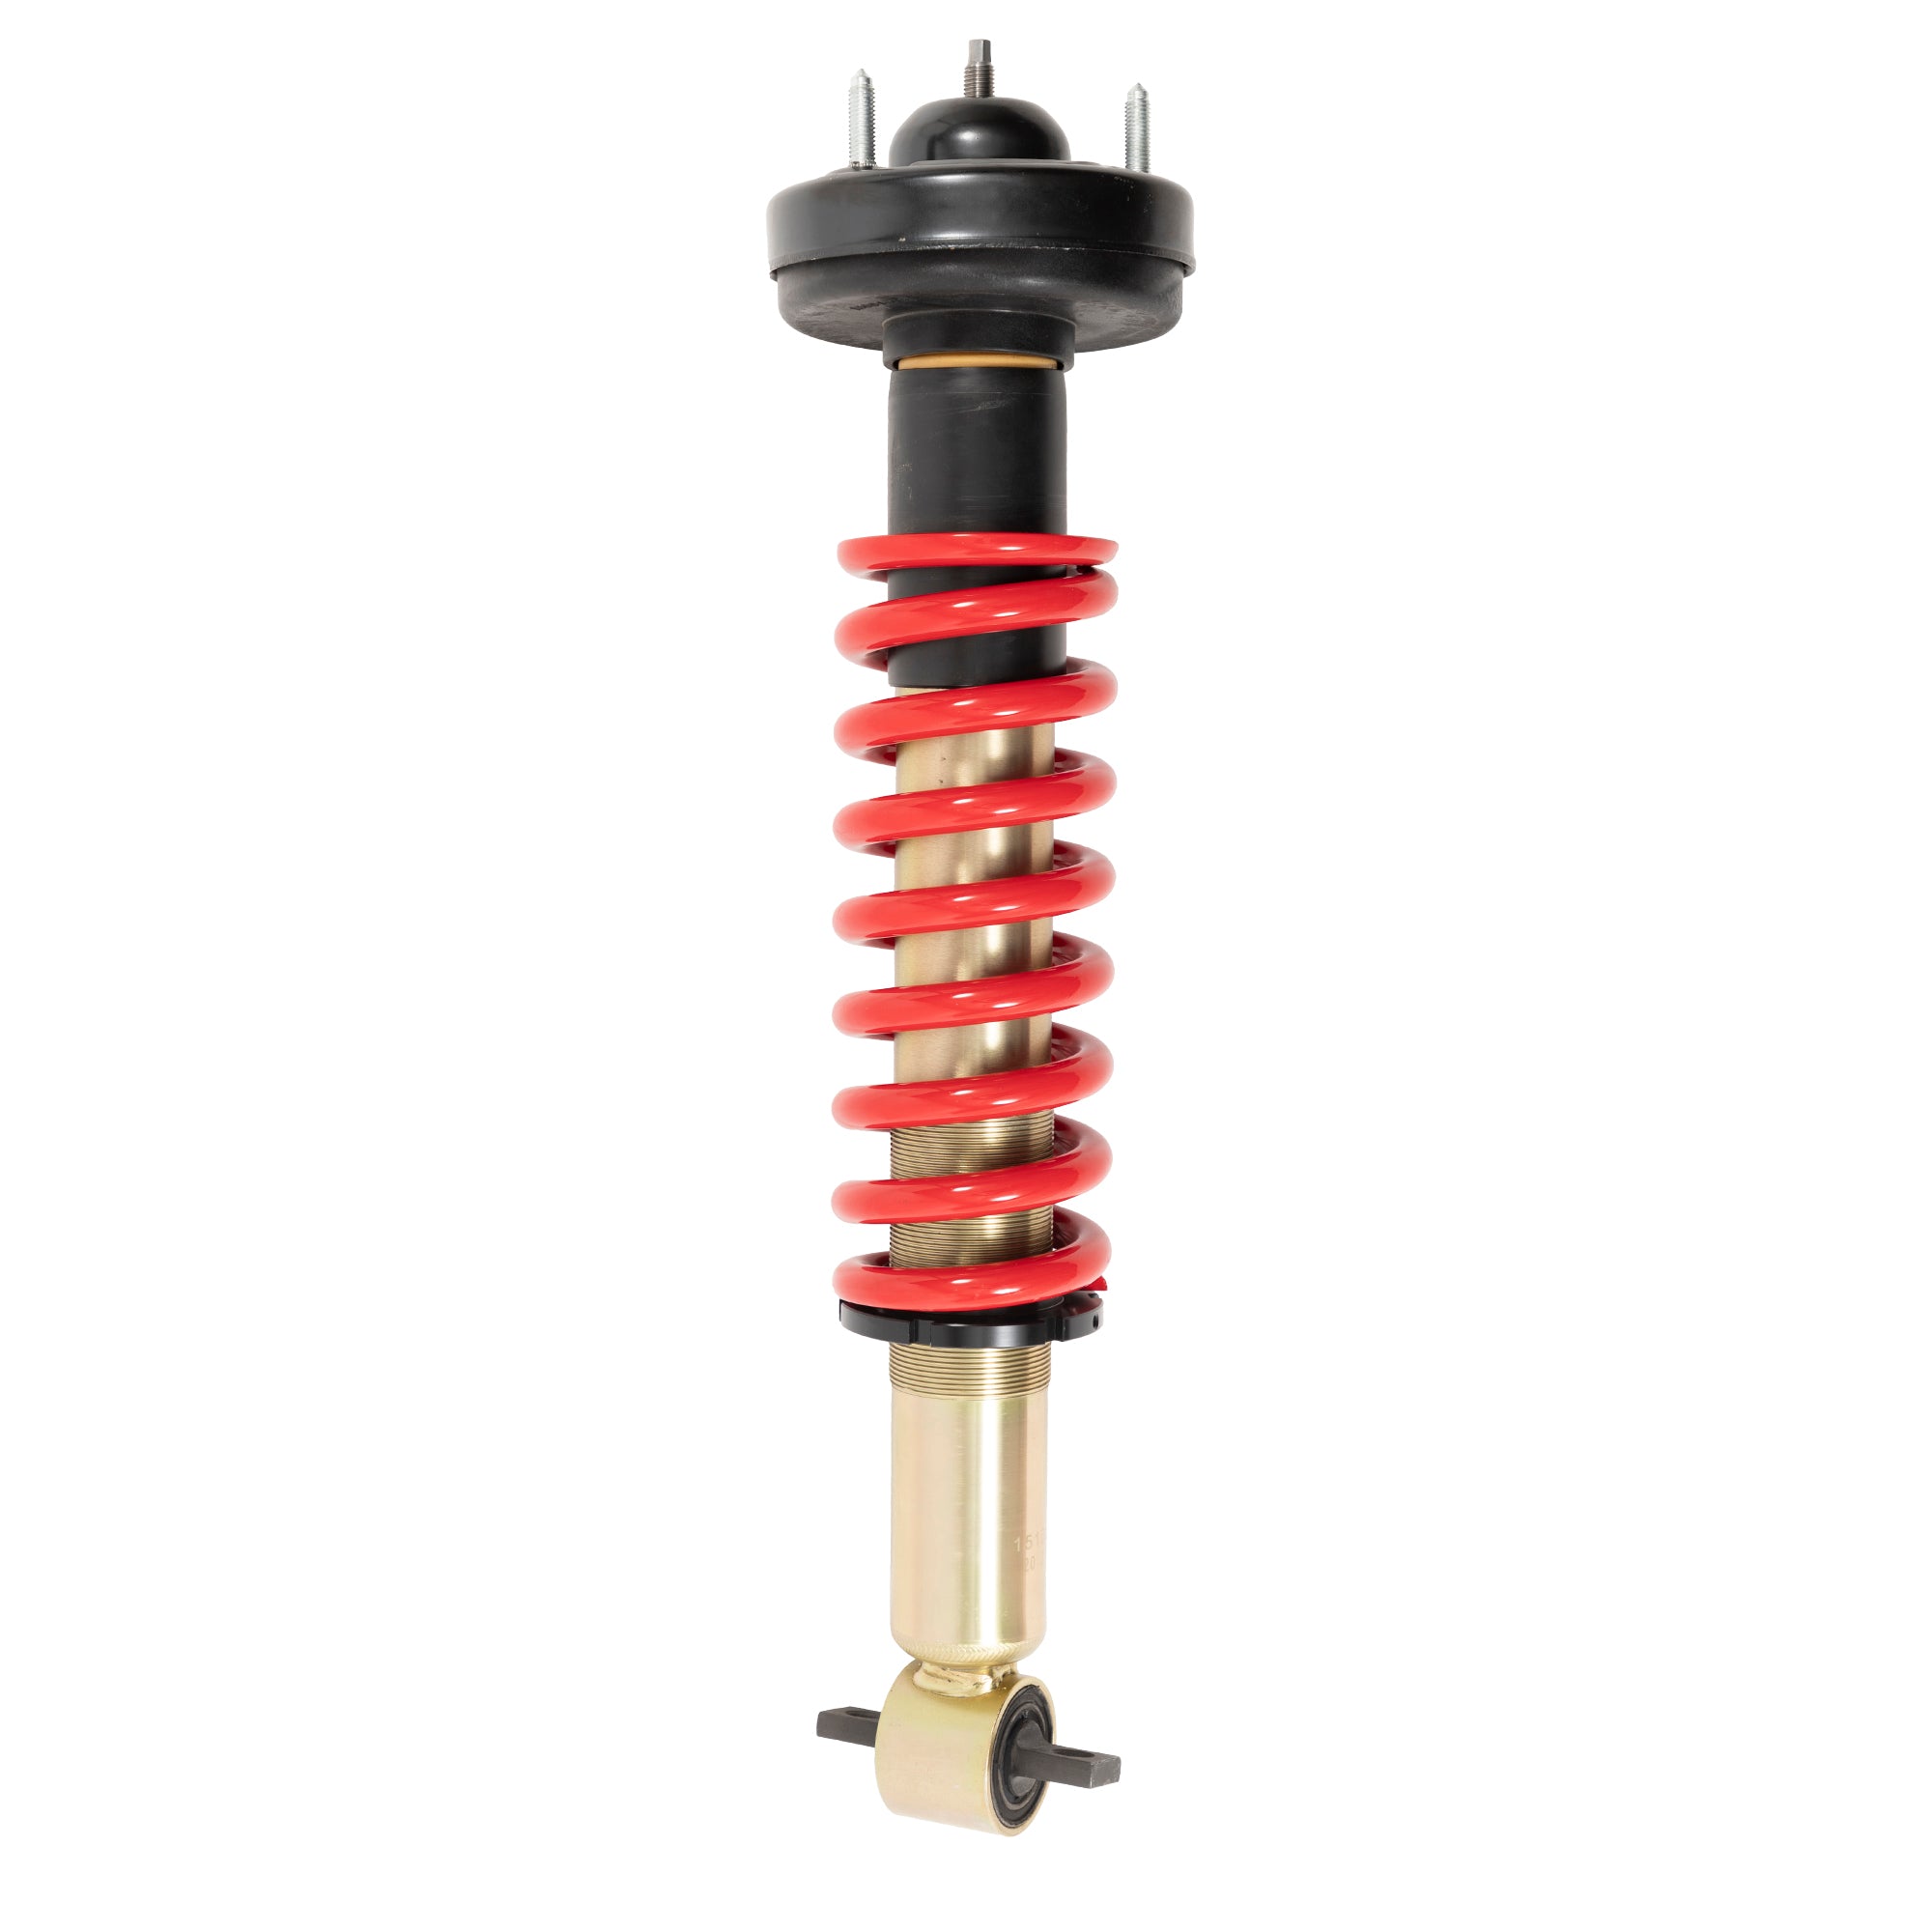 Factory Preset Fixed Damping, 0-2" Height Adjustable Level